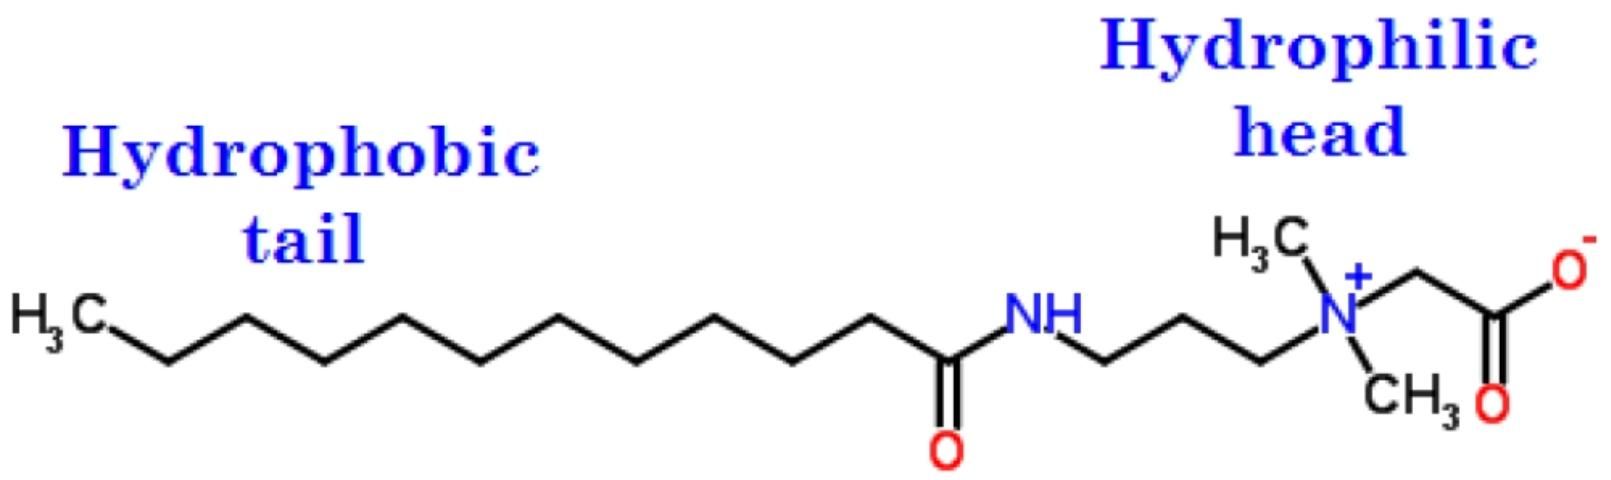 Figure 5. Chemical structure of an amphoteric surfactant, cocamidopropyl betaine (CAPB). Its chemical formula is C19H38N2O3. This surfactant has an 11-carbon hydrophobic tail and a positively charged nitrogen and a dissociated carboxylated hydrophilic head.